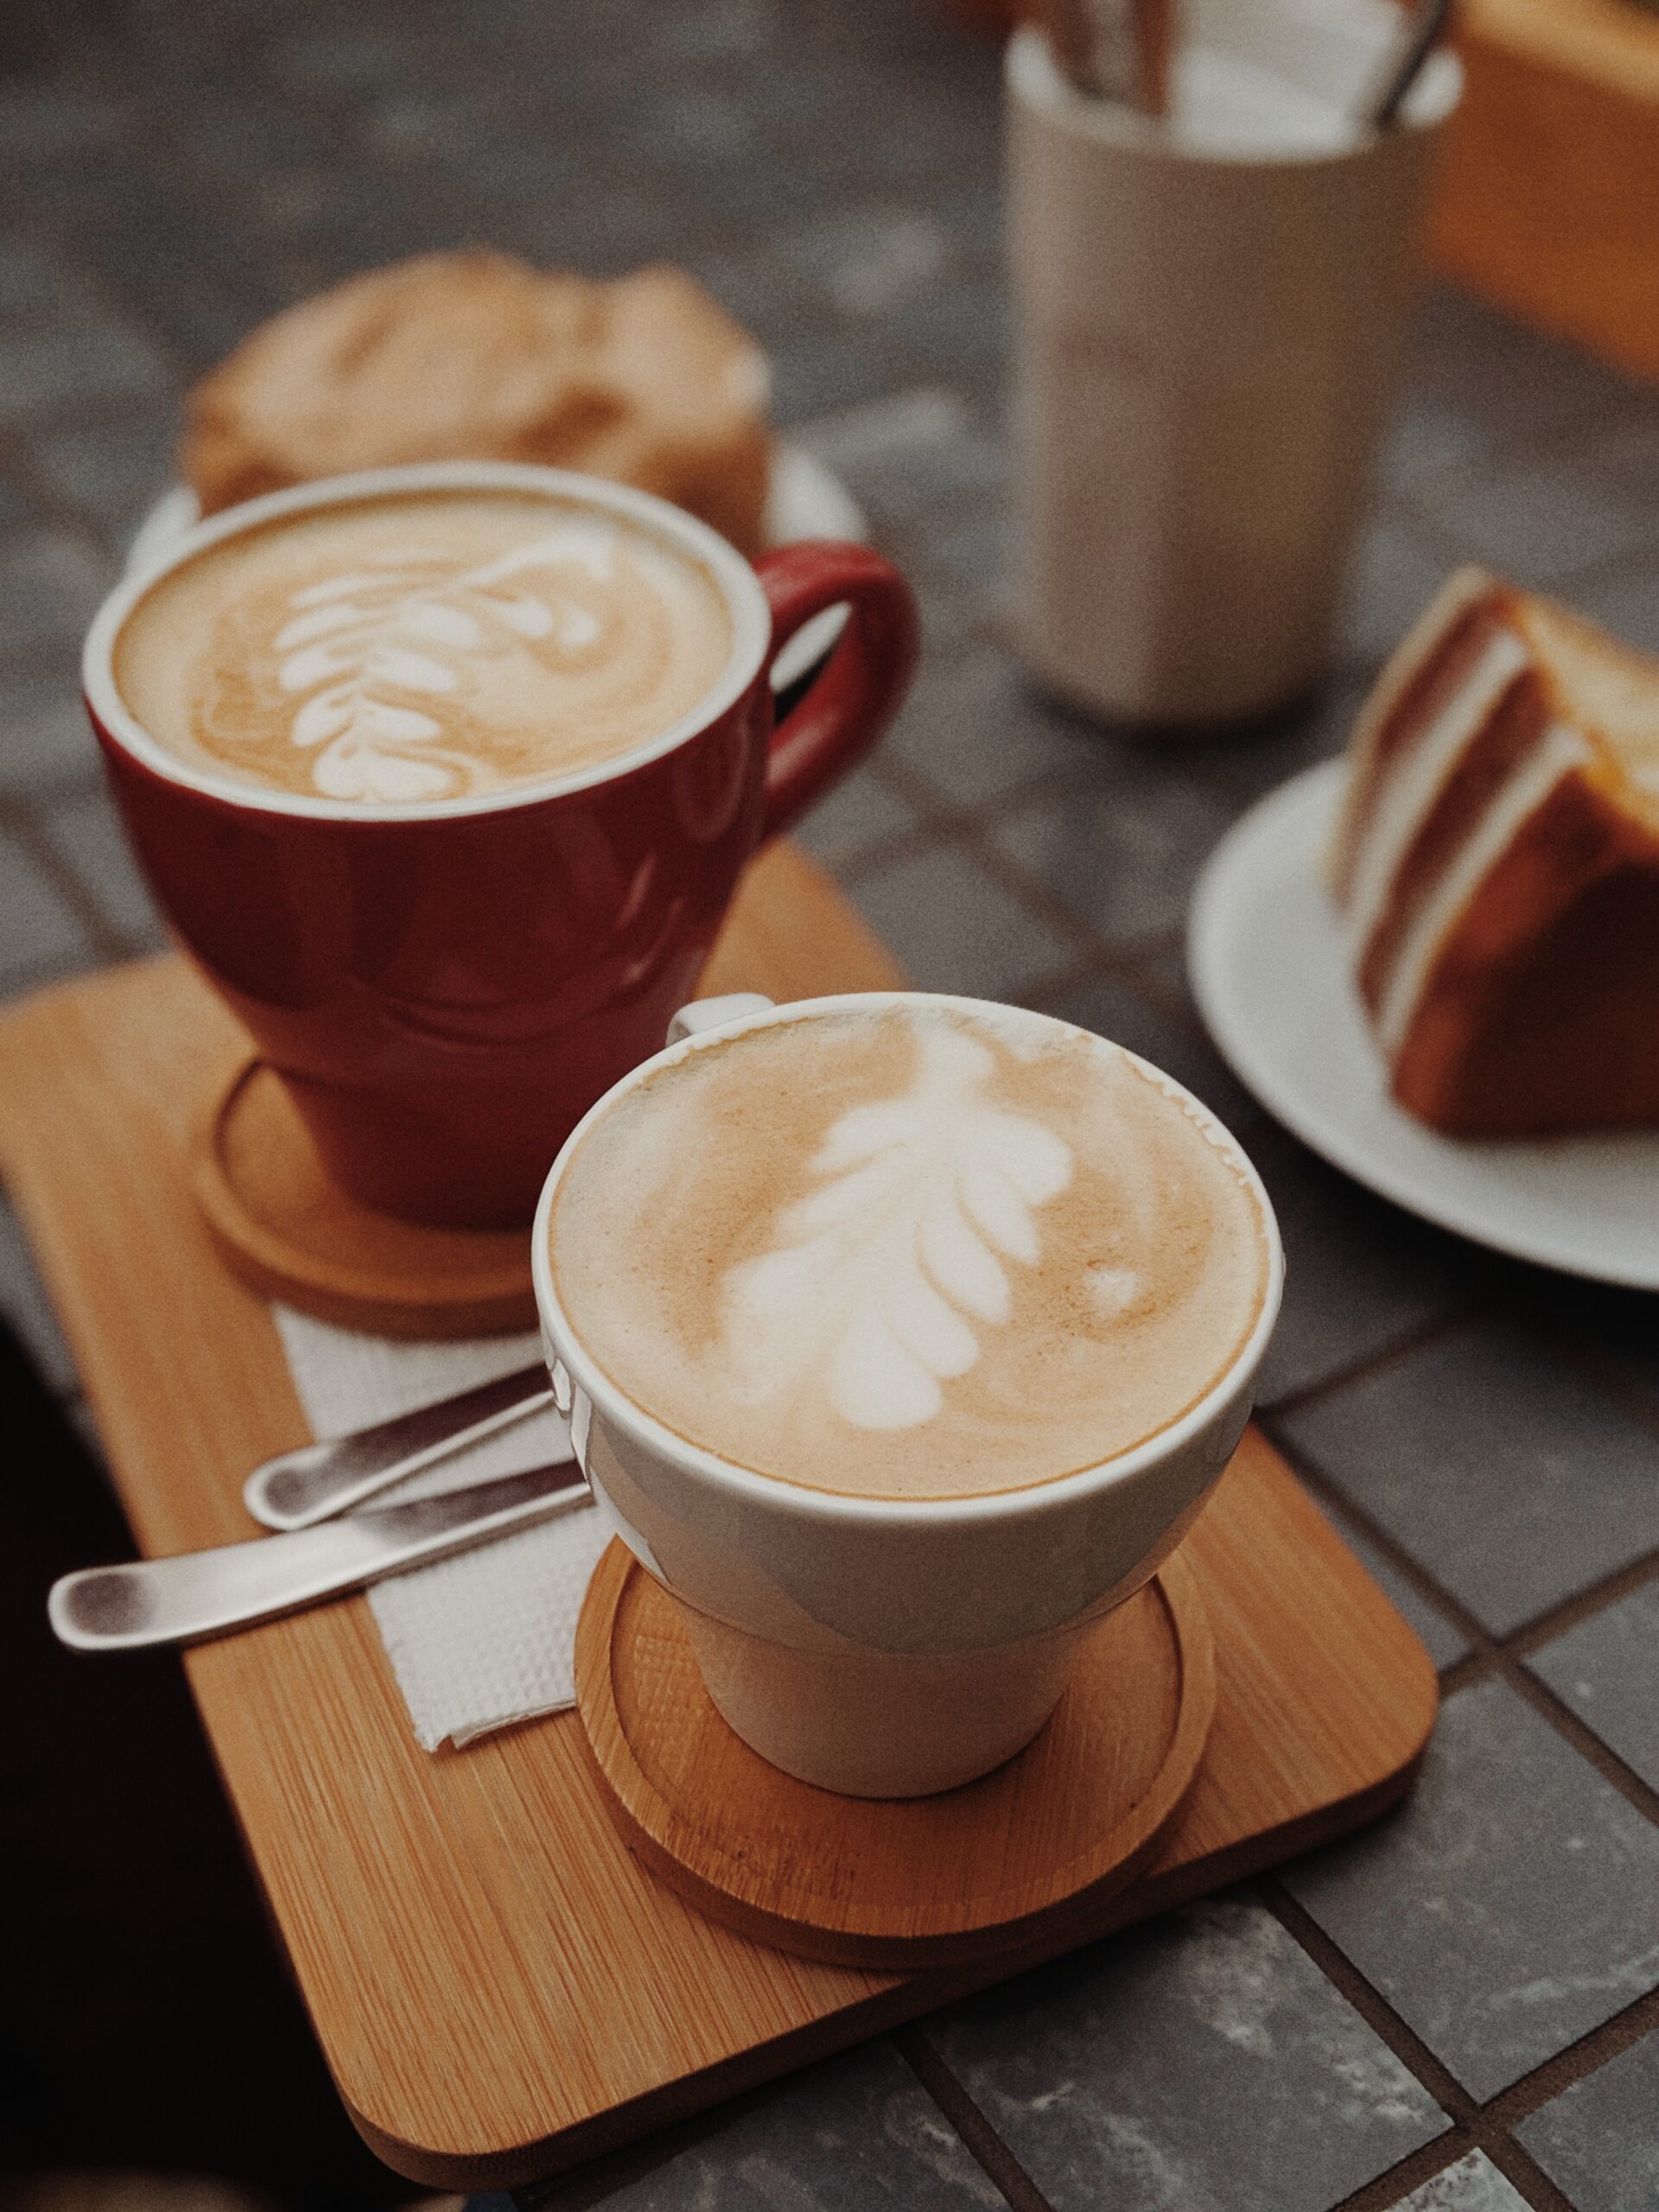 START YOUR OWN COFFEE SHOP – 4 KEY TIPS TO SUCCESS